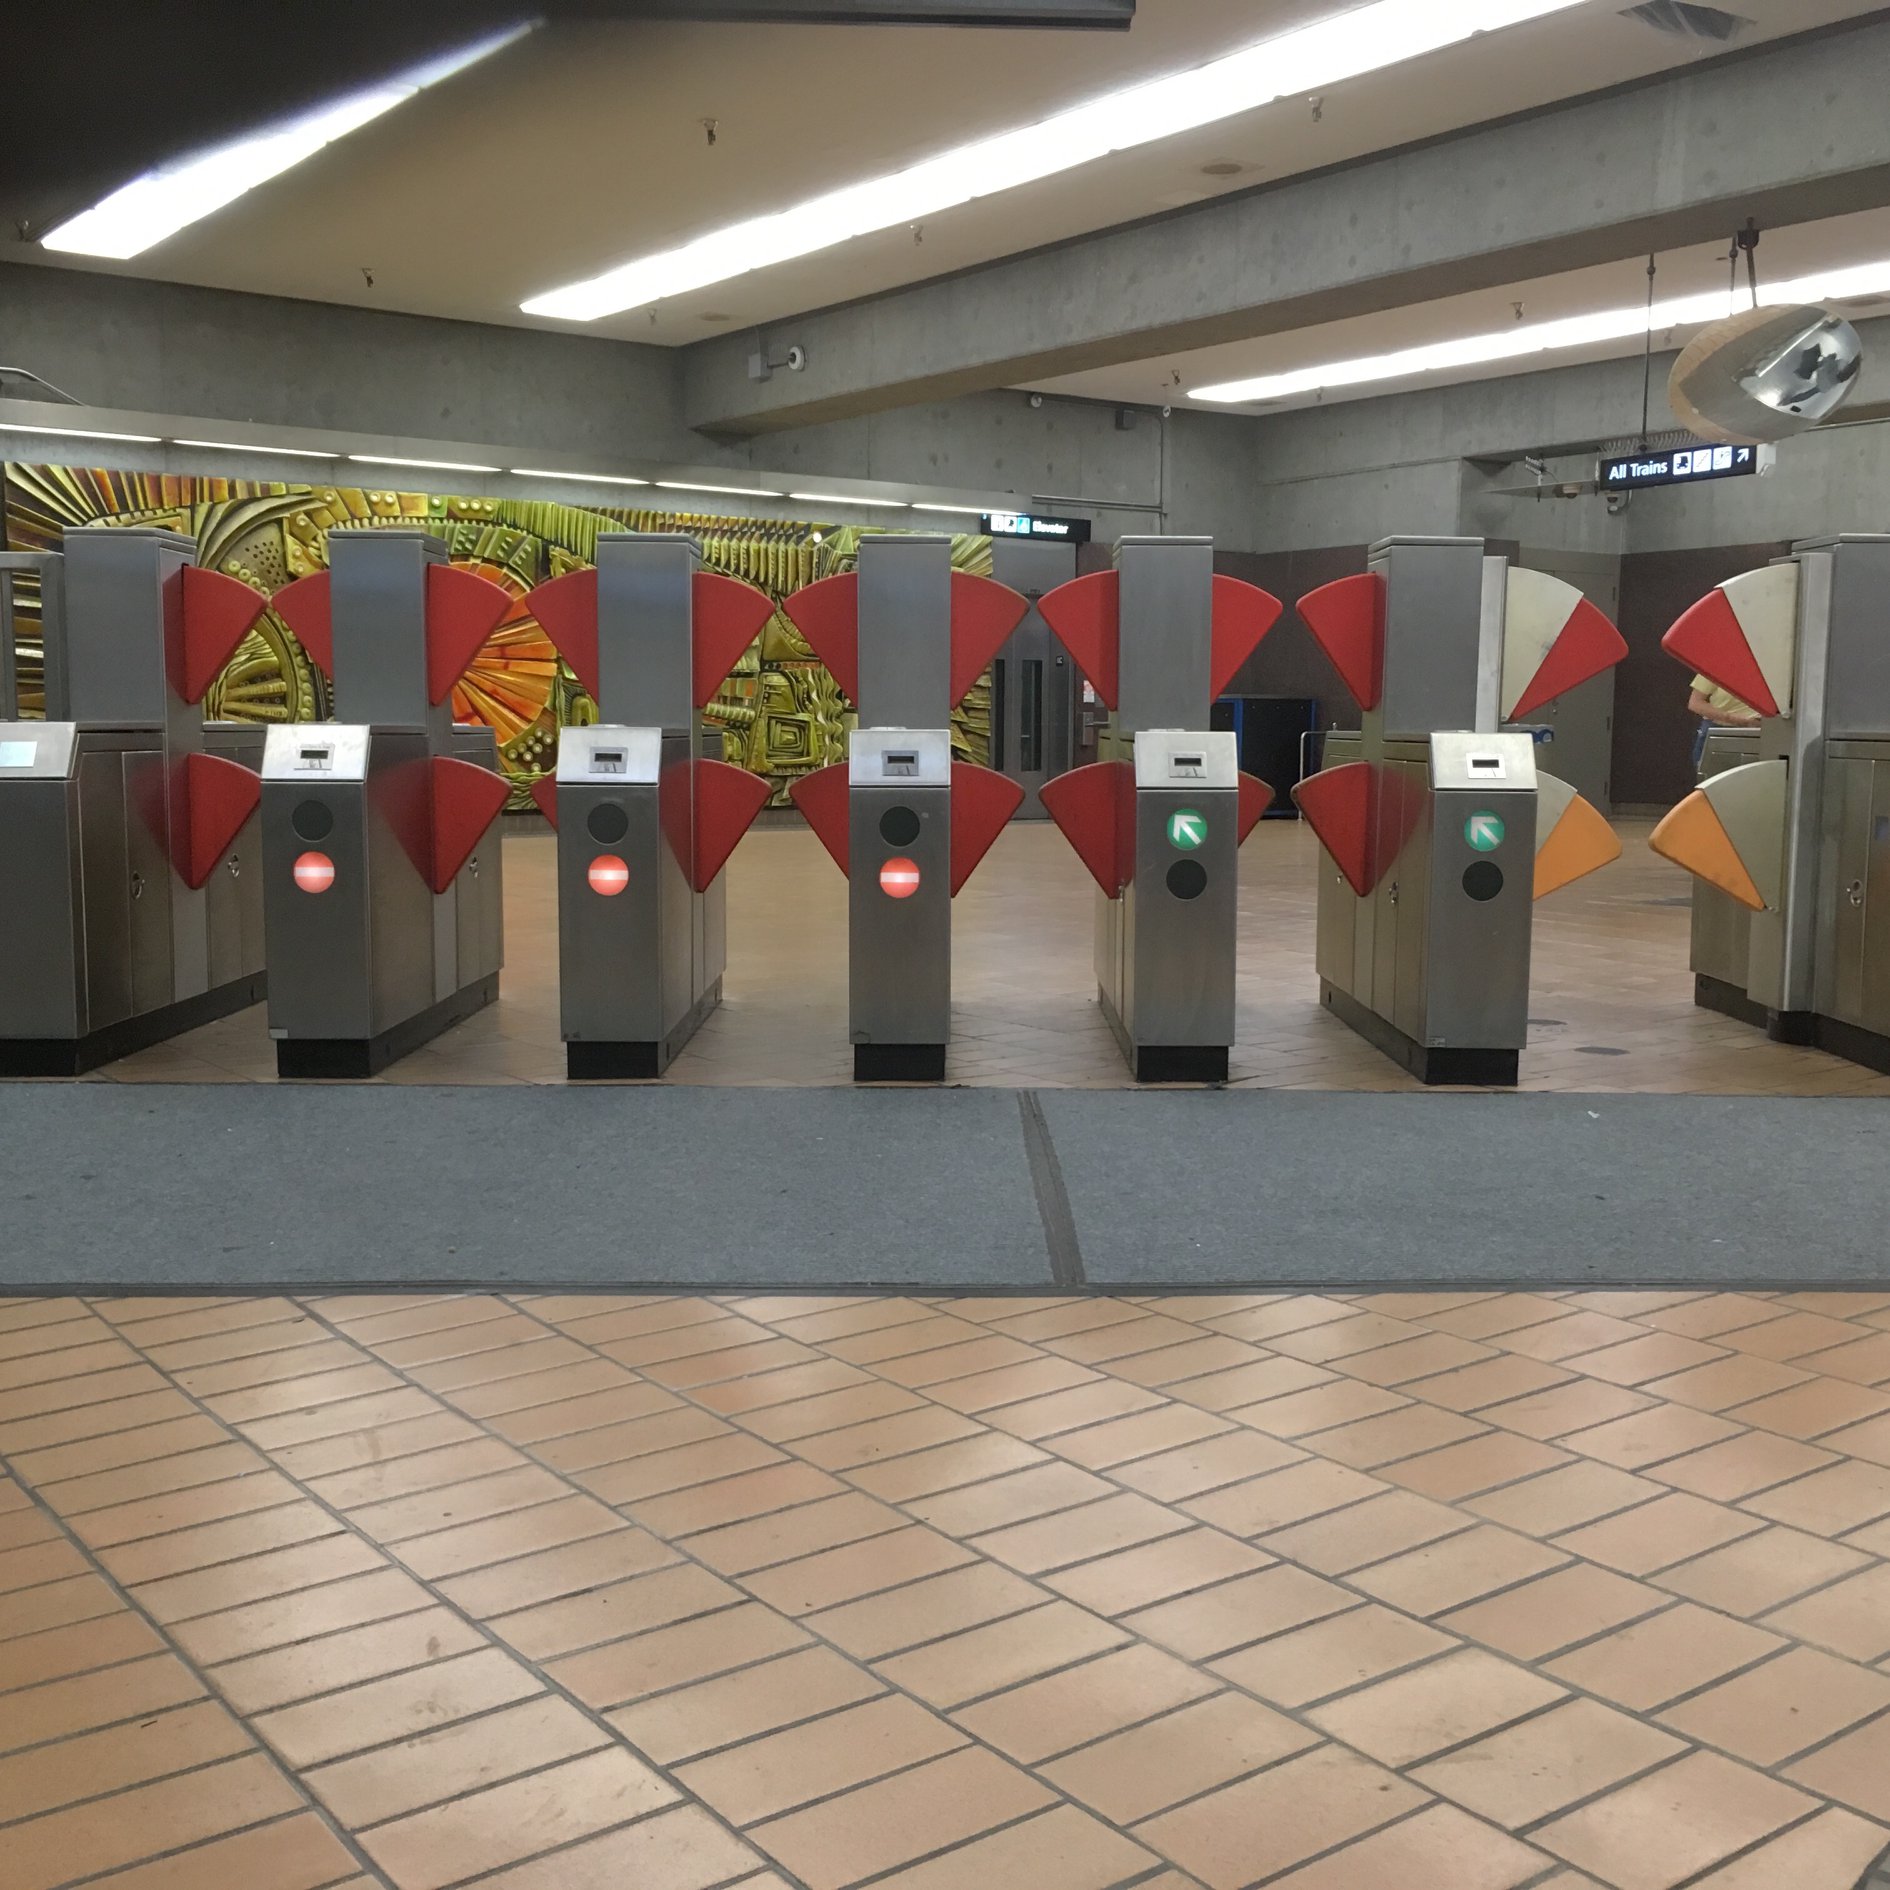 Transit fare gates with a lower and upper gates to prevent people from jumping over the gates.